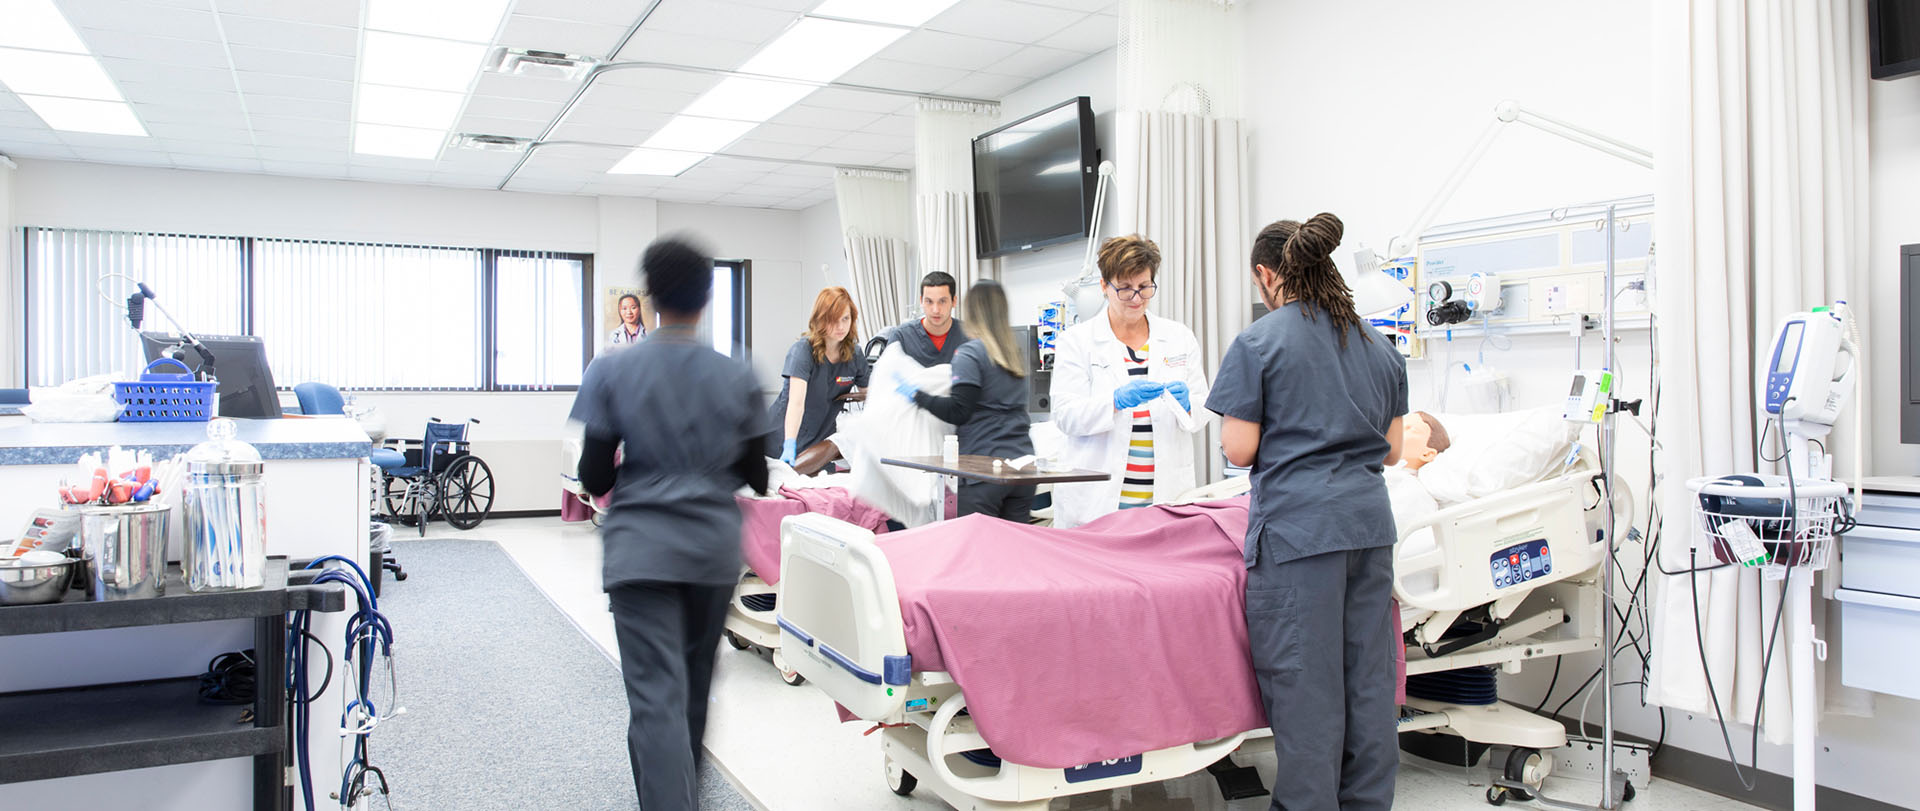 Students working in a nursing classroom at Ferris State University